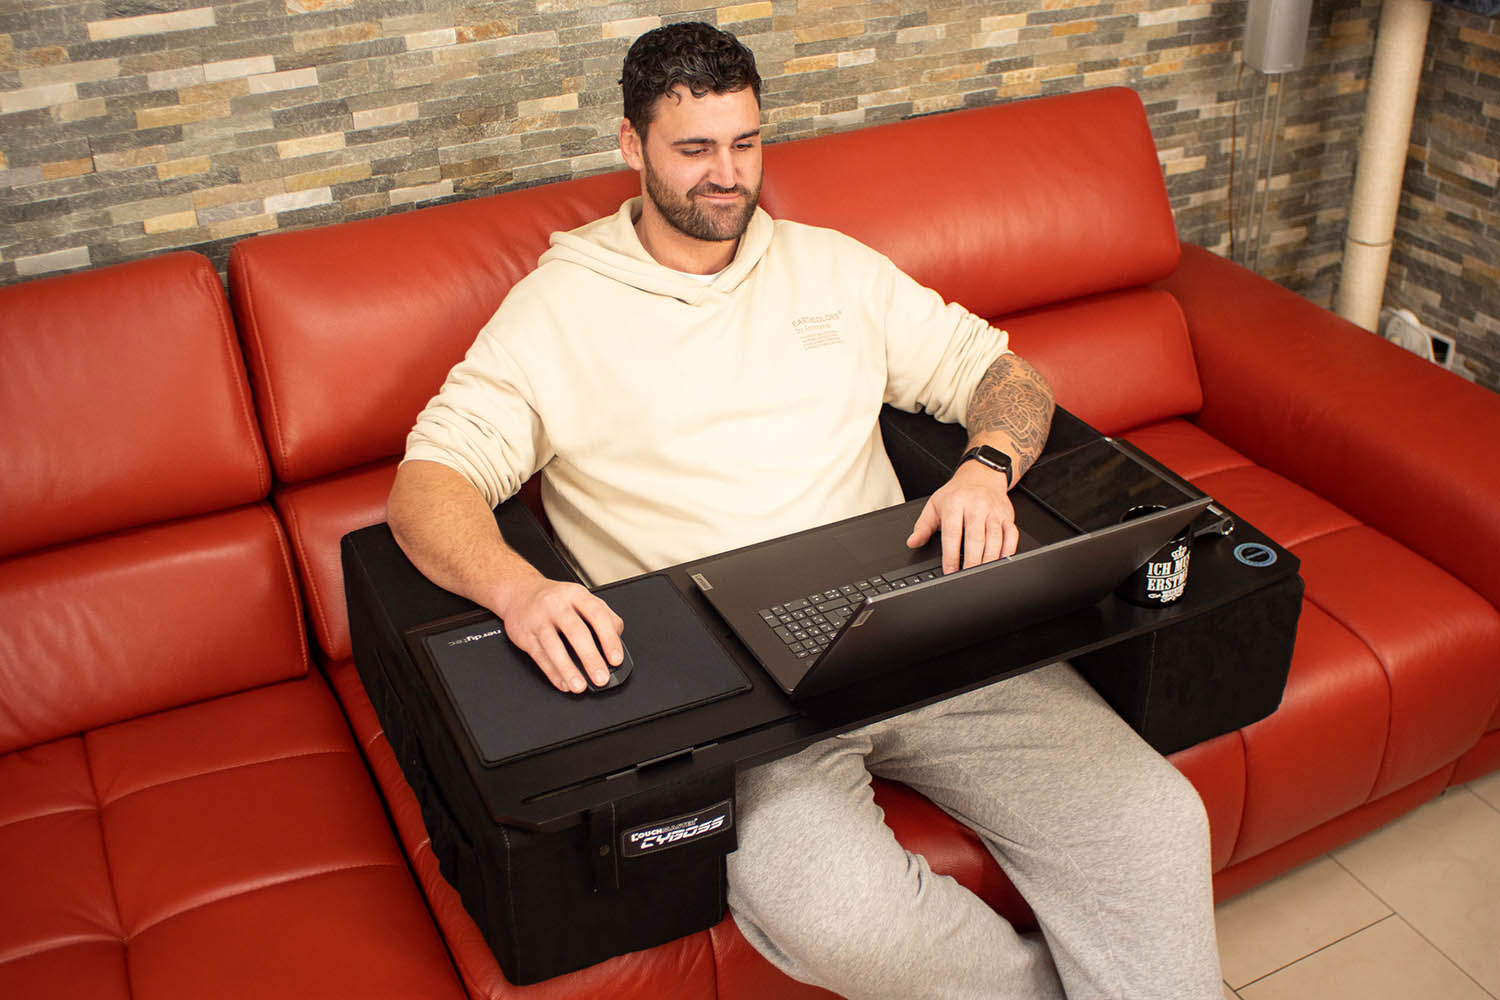 How this Hardware Company is Revolutionizing Working from Home and